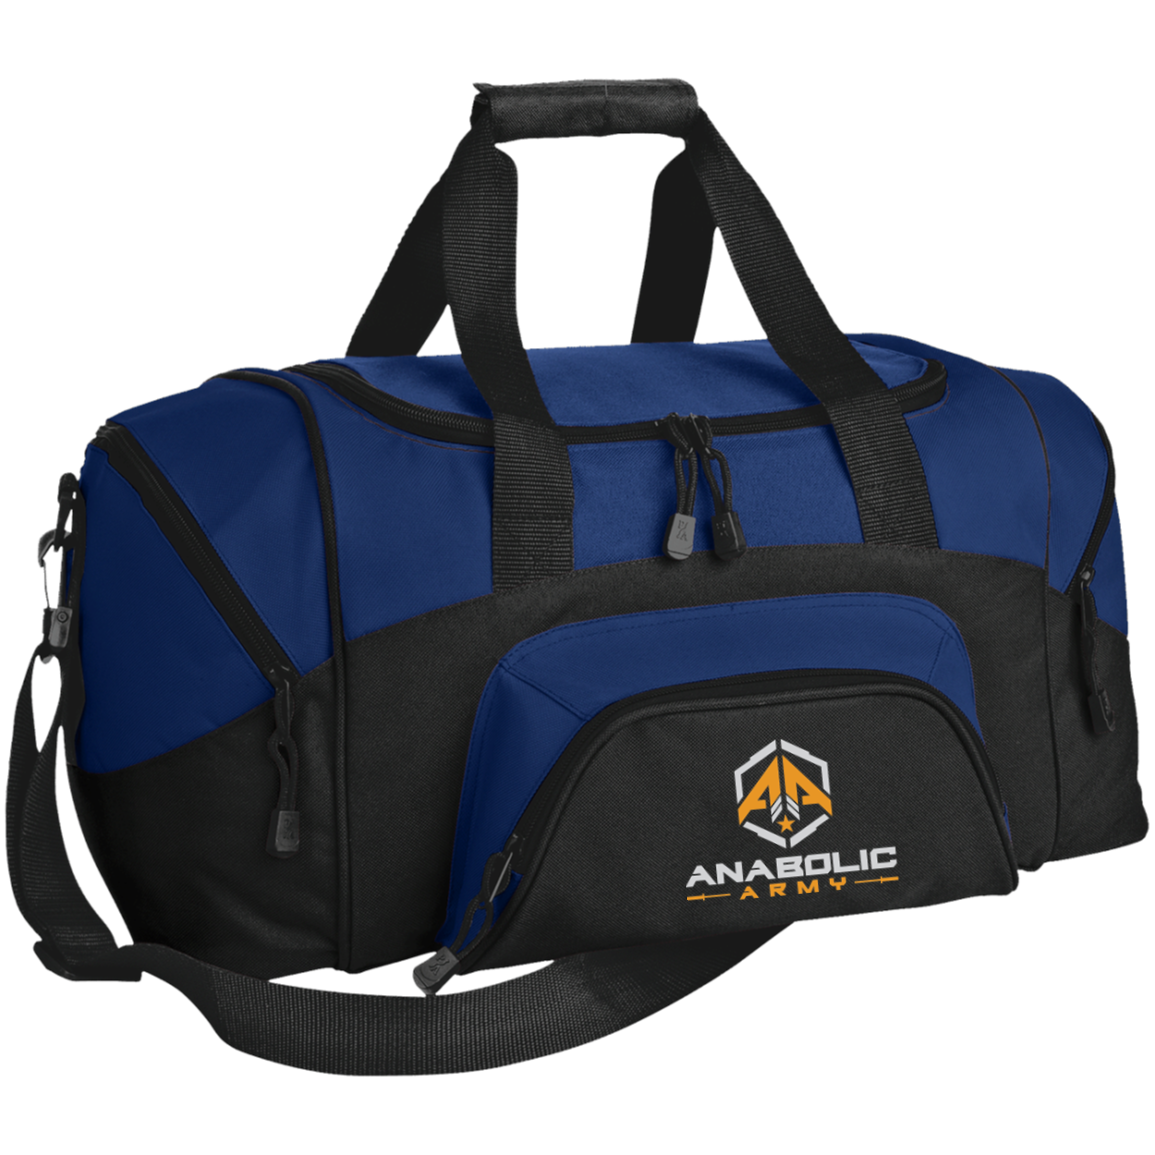 Anabolic Army Small Colorblock Sport Duffel Bag - The Anabolic Army